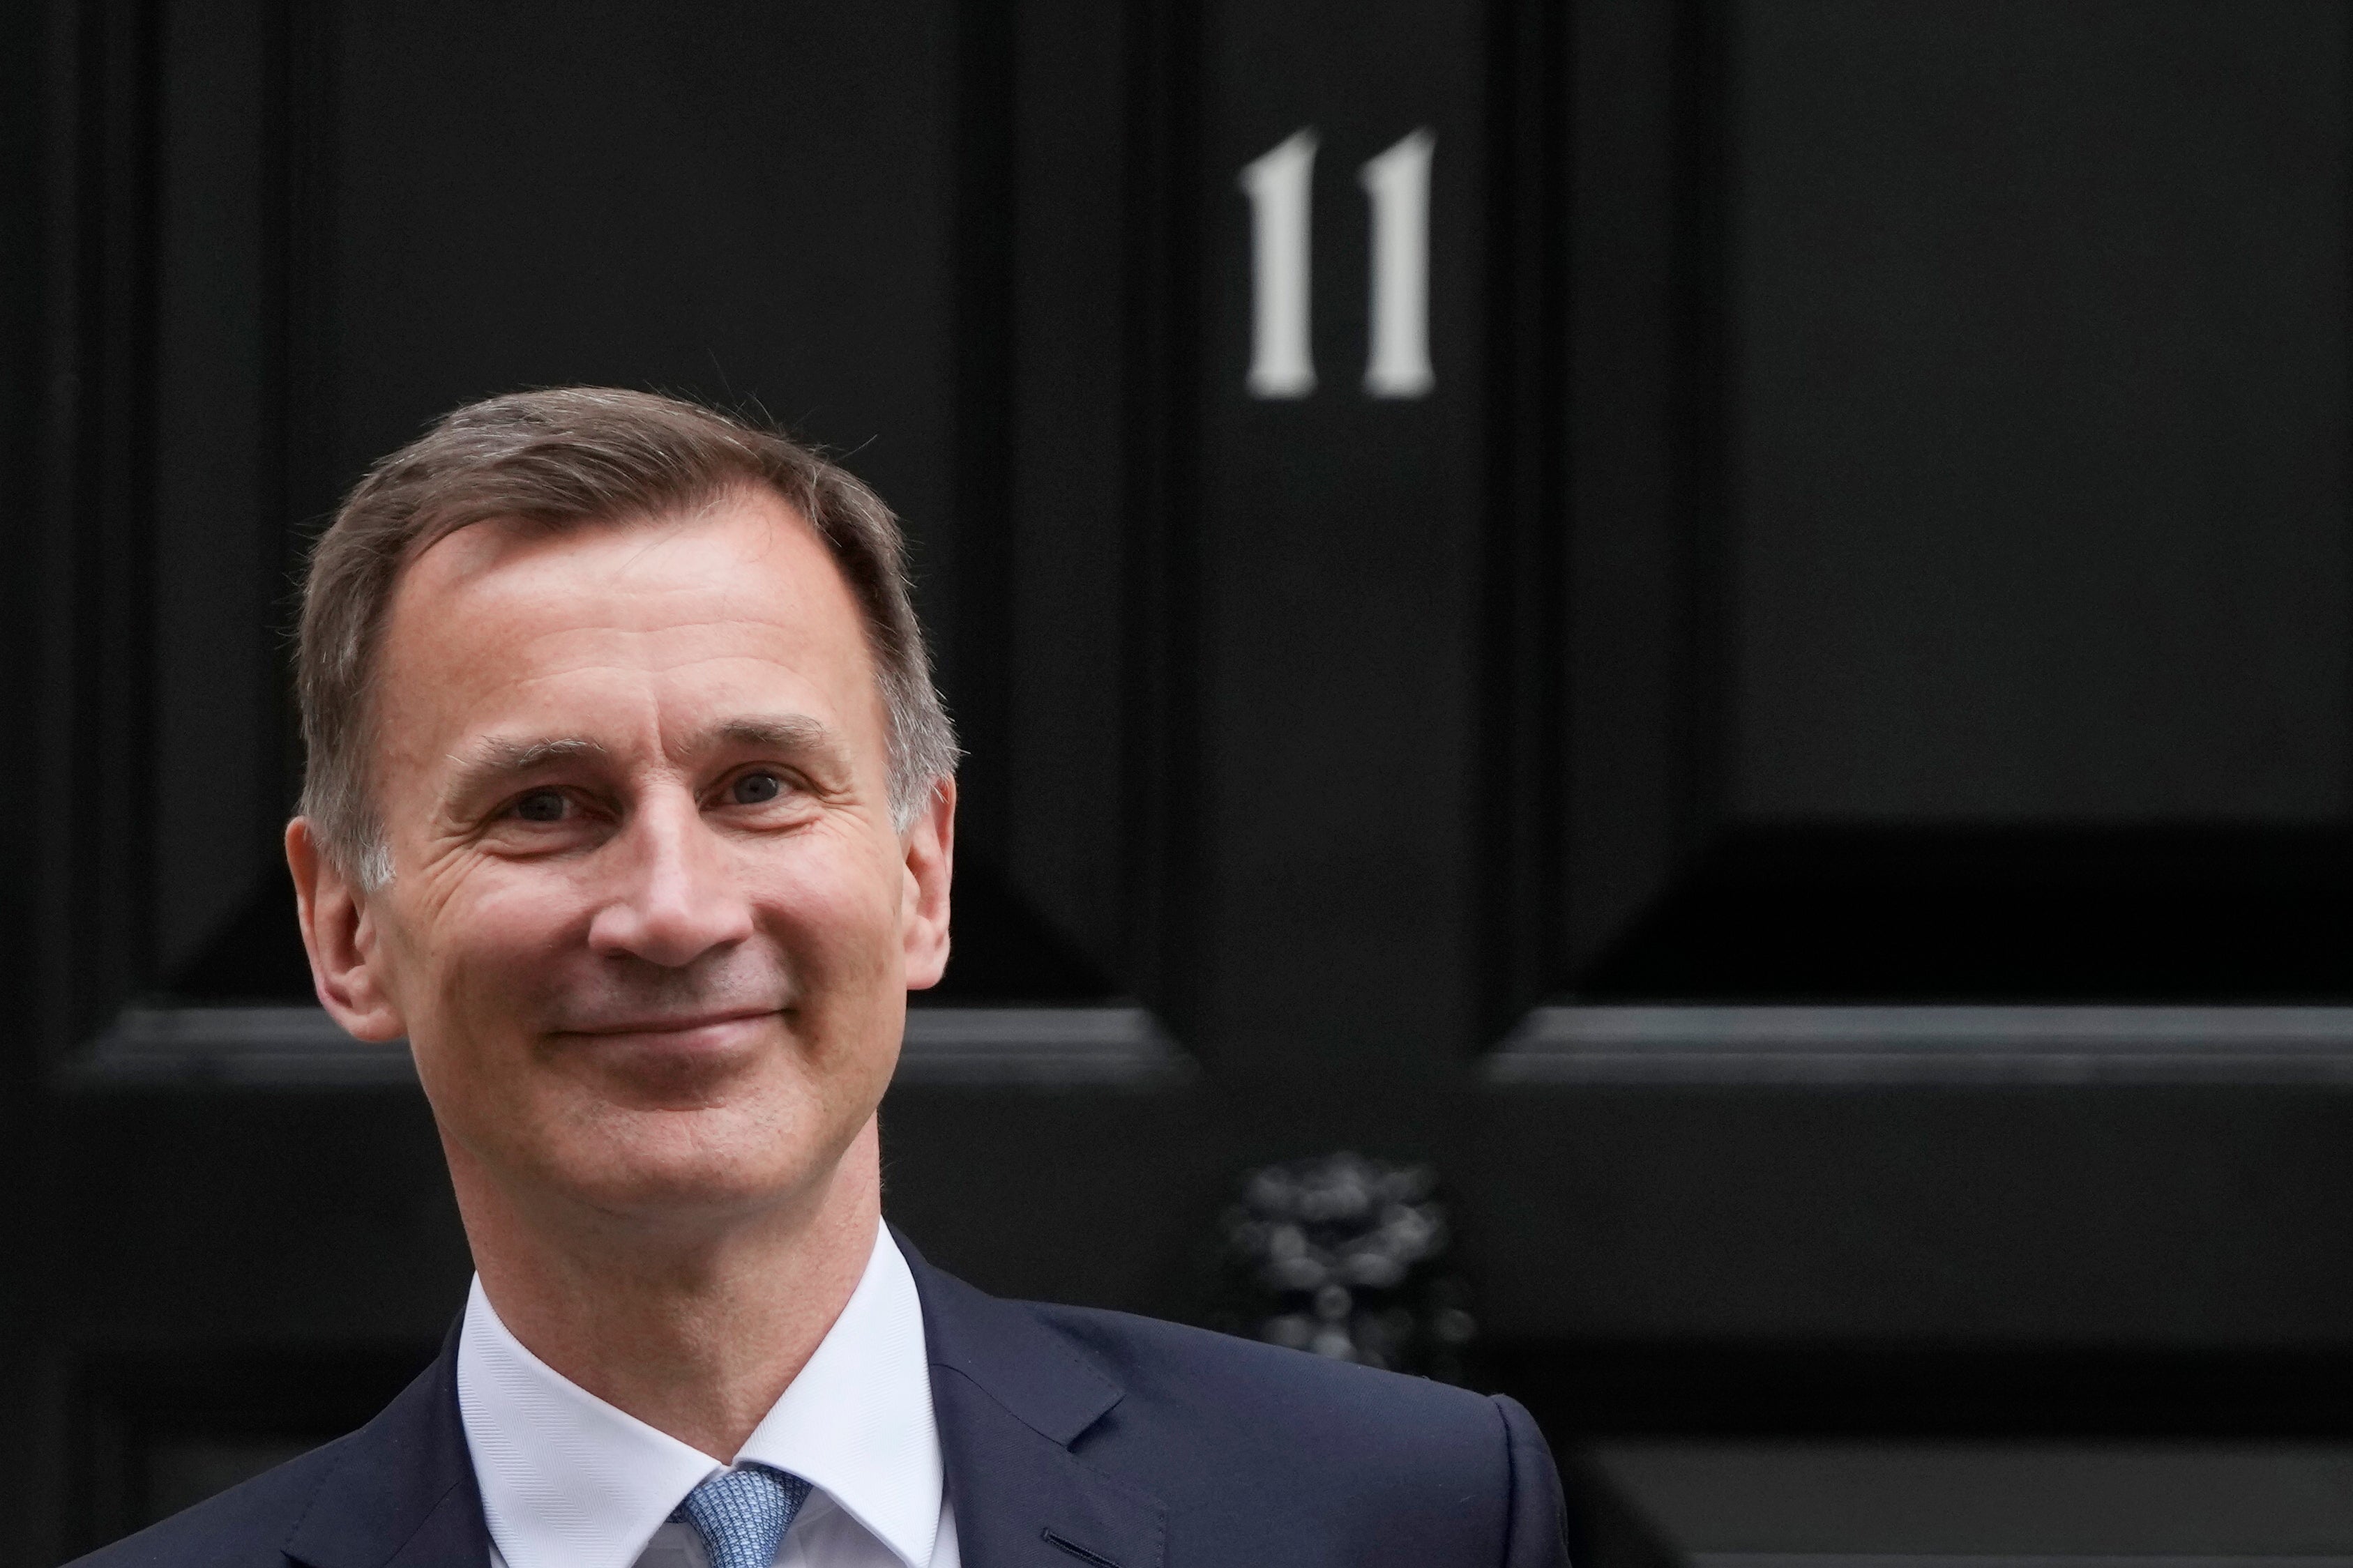 The first measure of Wednesday’s autumn statement is an assault on the poor